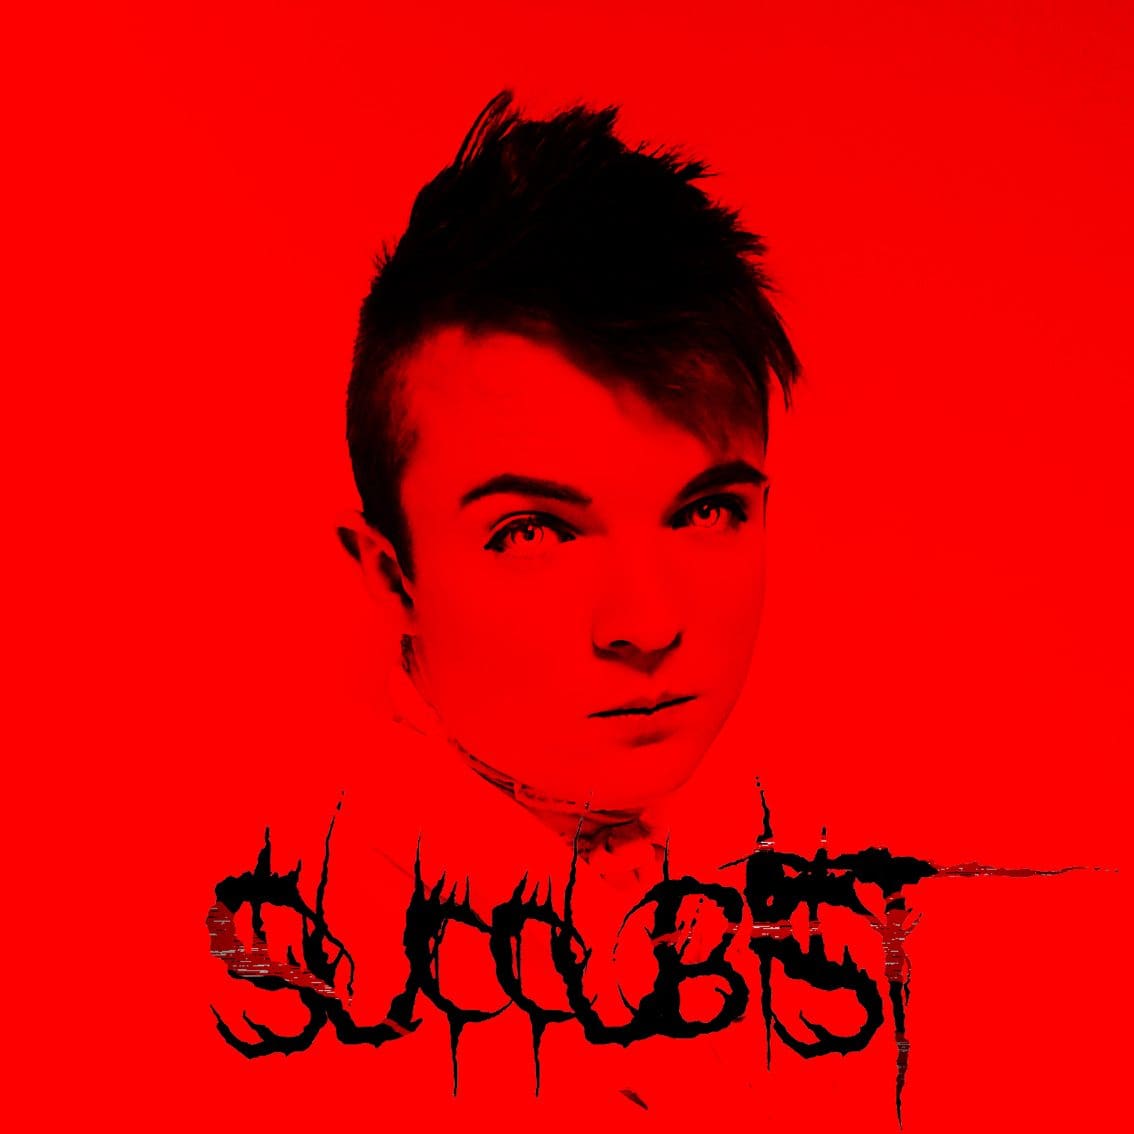 Japanese electronic project Succubist debuts with'Blood Flow' album - preview it here